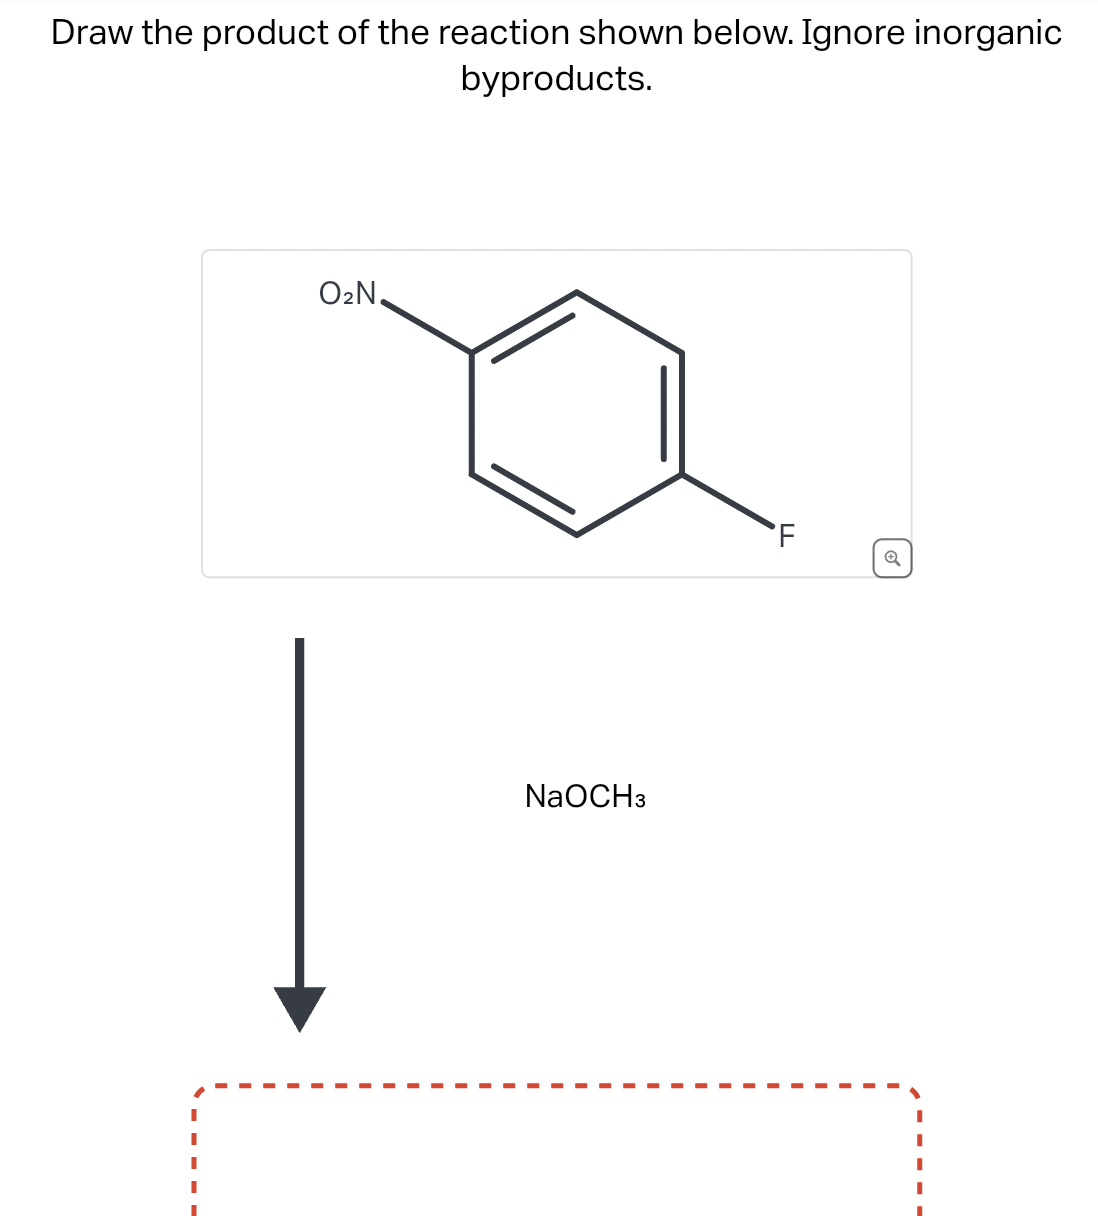 Draw the product of the reaction shown below. Ignore inorganic
byproducts.
O₂N.
NaOCH3
F
Q